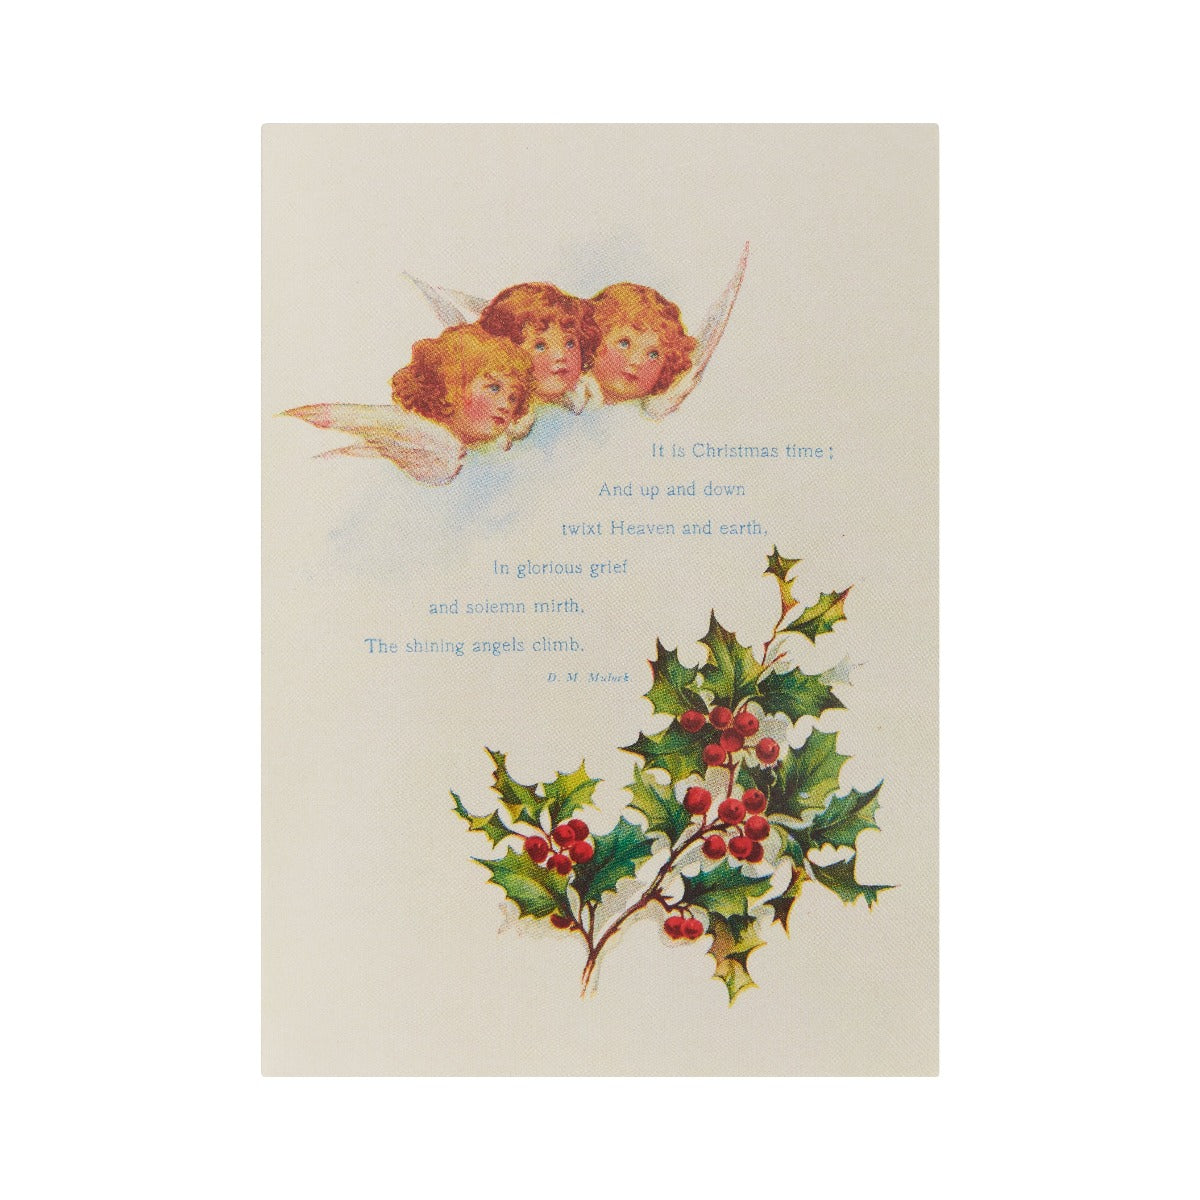 Rectangular Christmas card - Victorian illustration with three cherubic angels, a Christmas poem, and holly sprig. From the collection of Cambridge University Library.